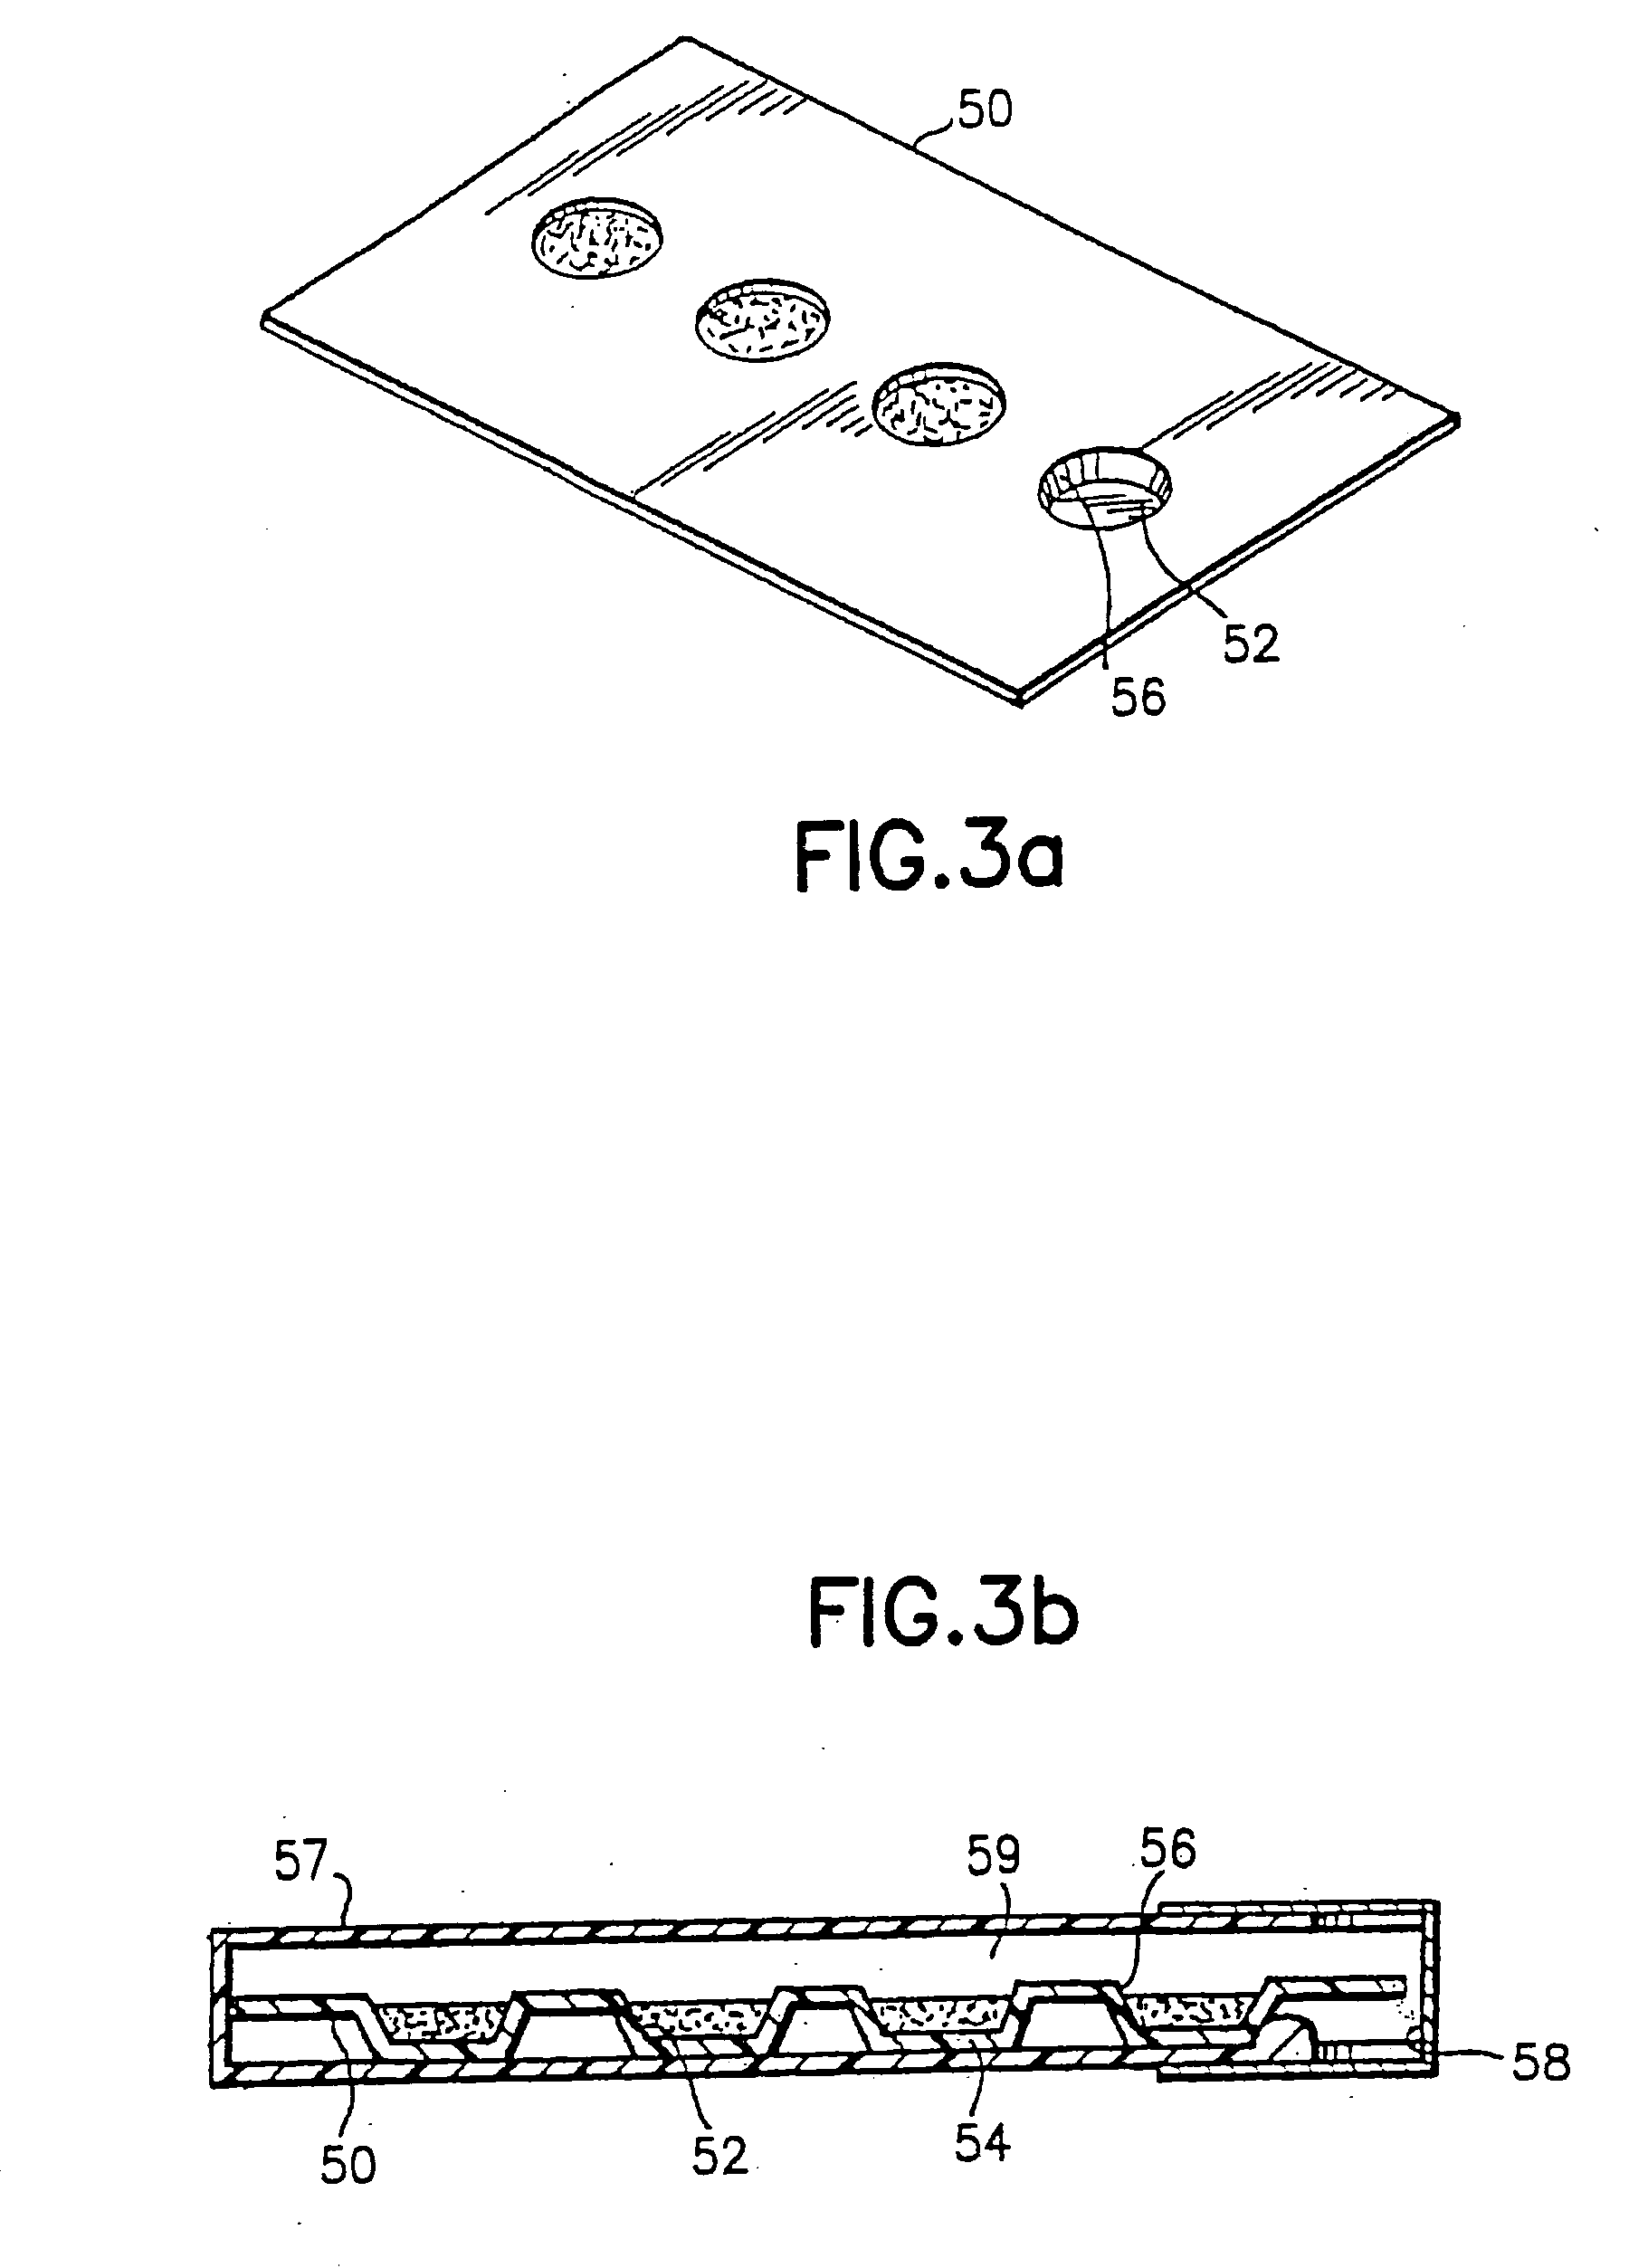 Phosphatase inhibitor sample collection system